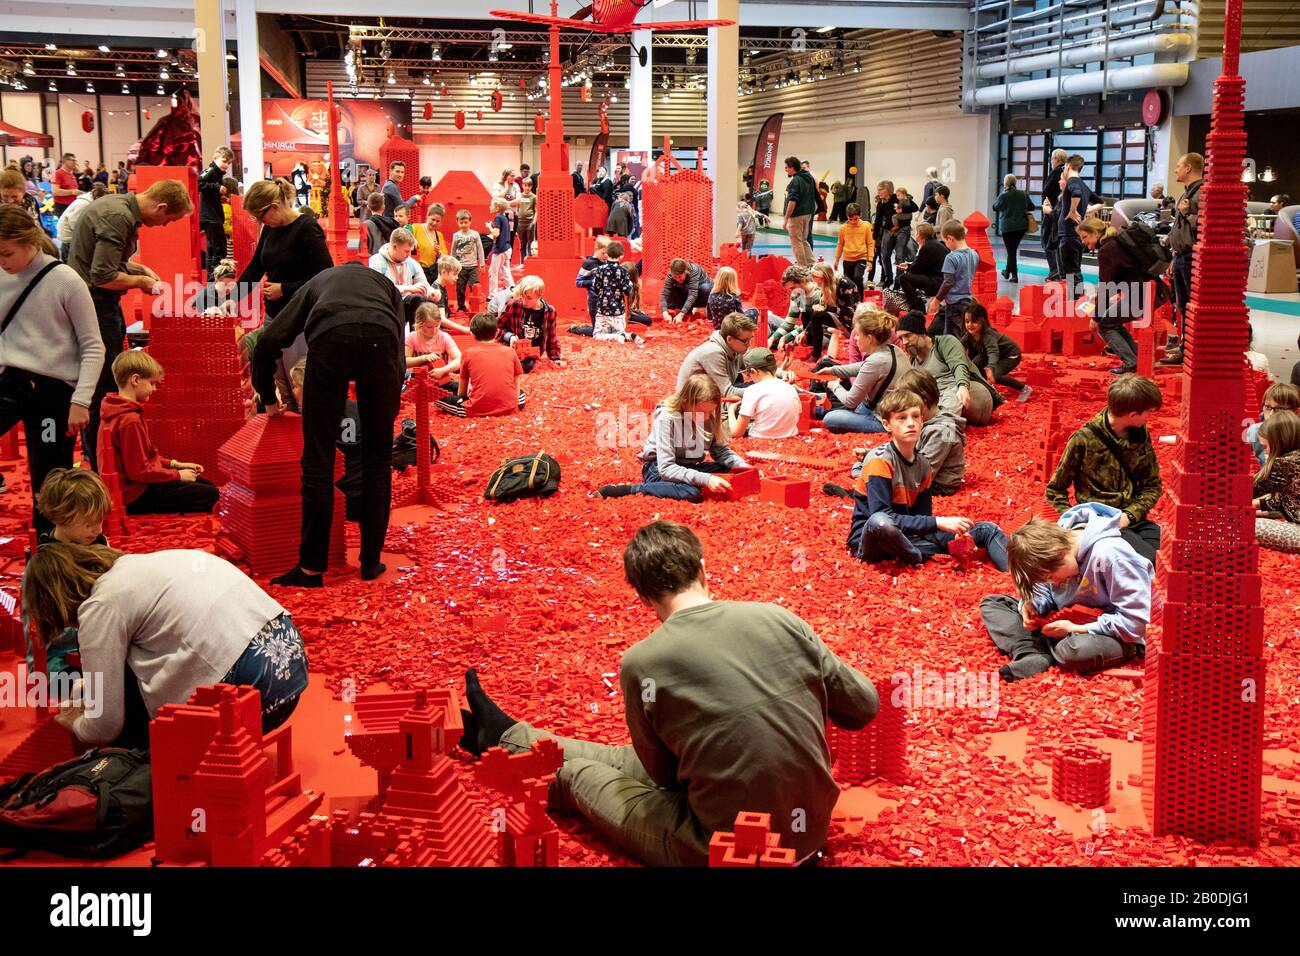 Copenhagen, Denmark. 13th Feb, 2017. Children and adults of ages go crazy at the annual LEGO World event in Bella Center Copenhagen. The LEGO Group is largest toy company